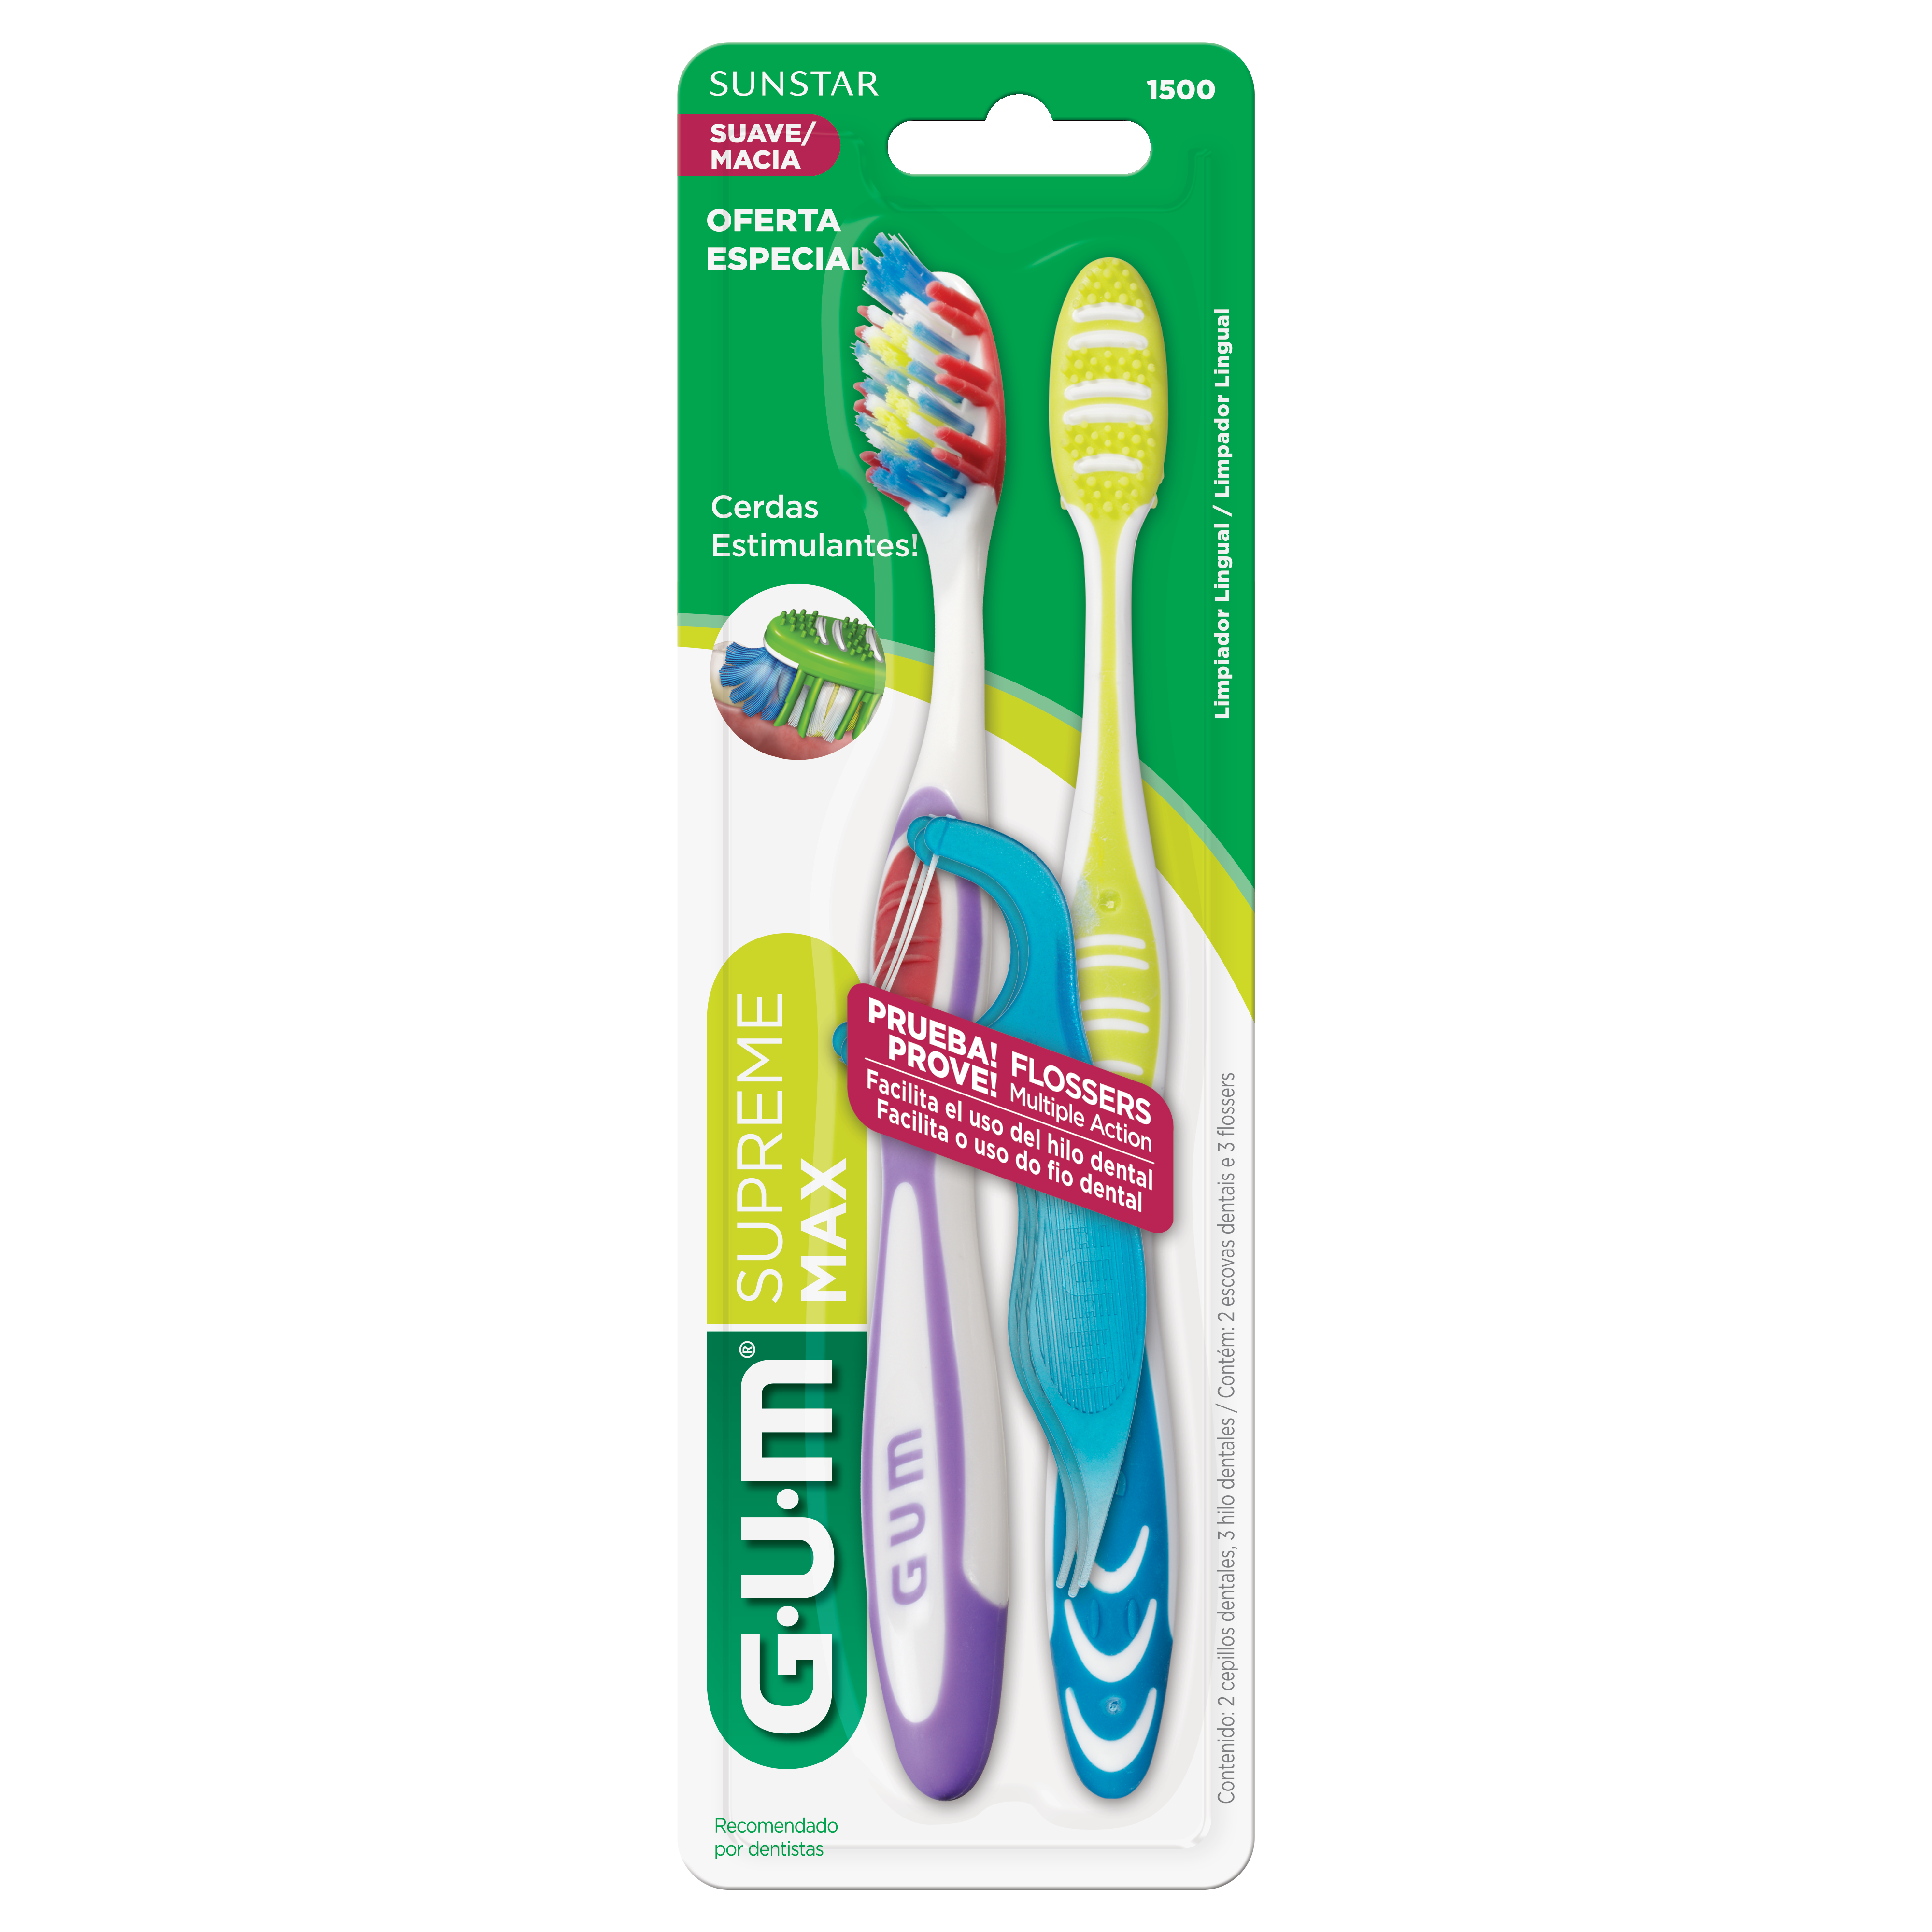 1500LT2-Product-Packaging-Toothbrush-Supreme-Max-front-2ct-bonus-flossers.png.png